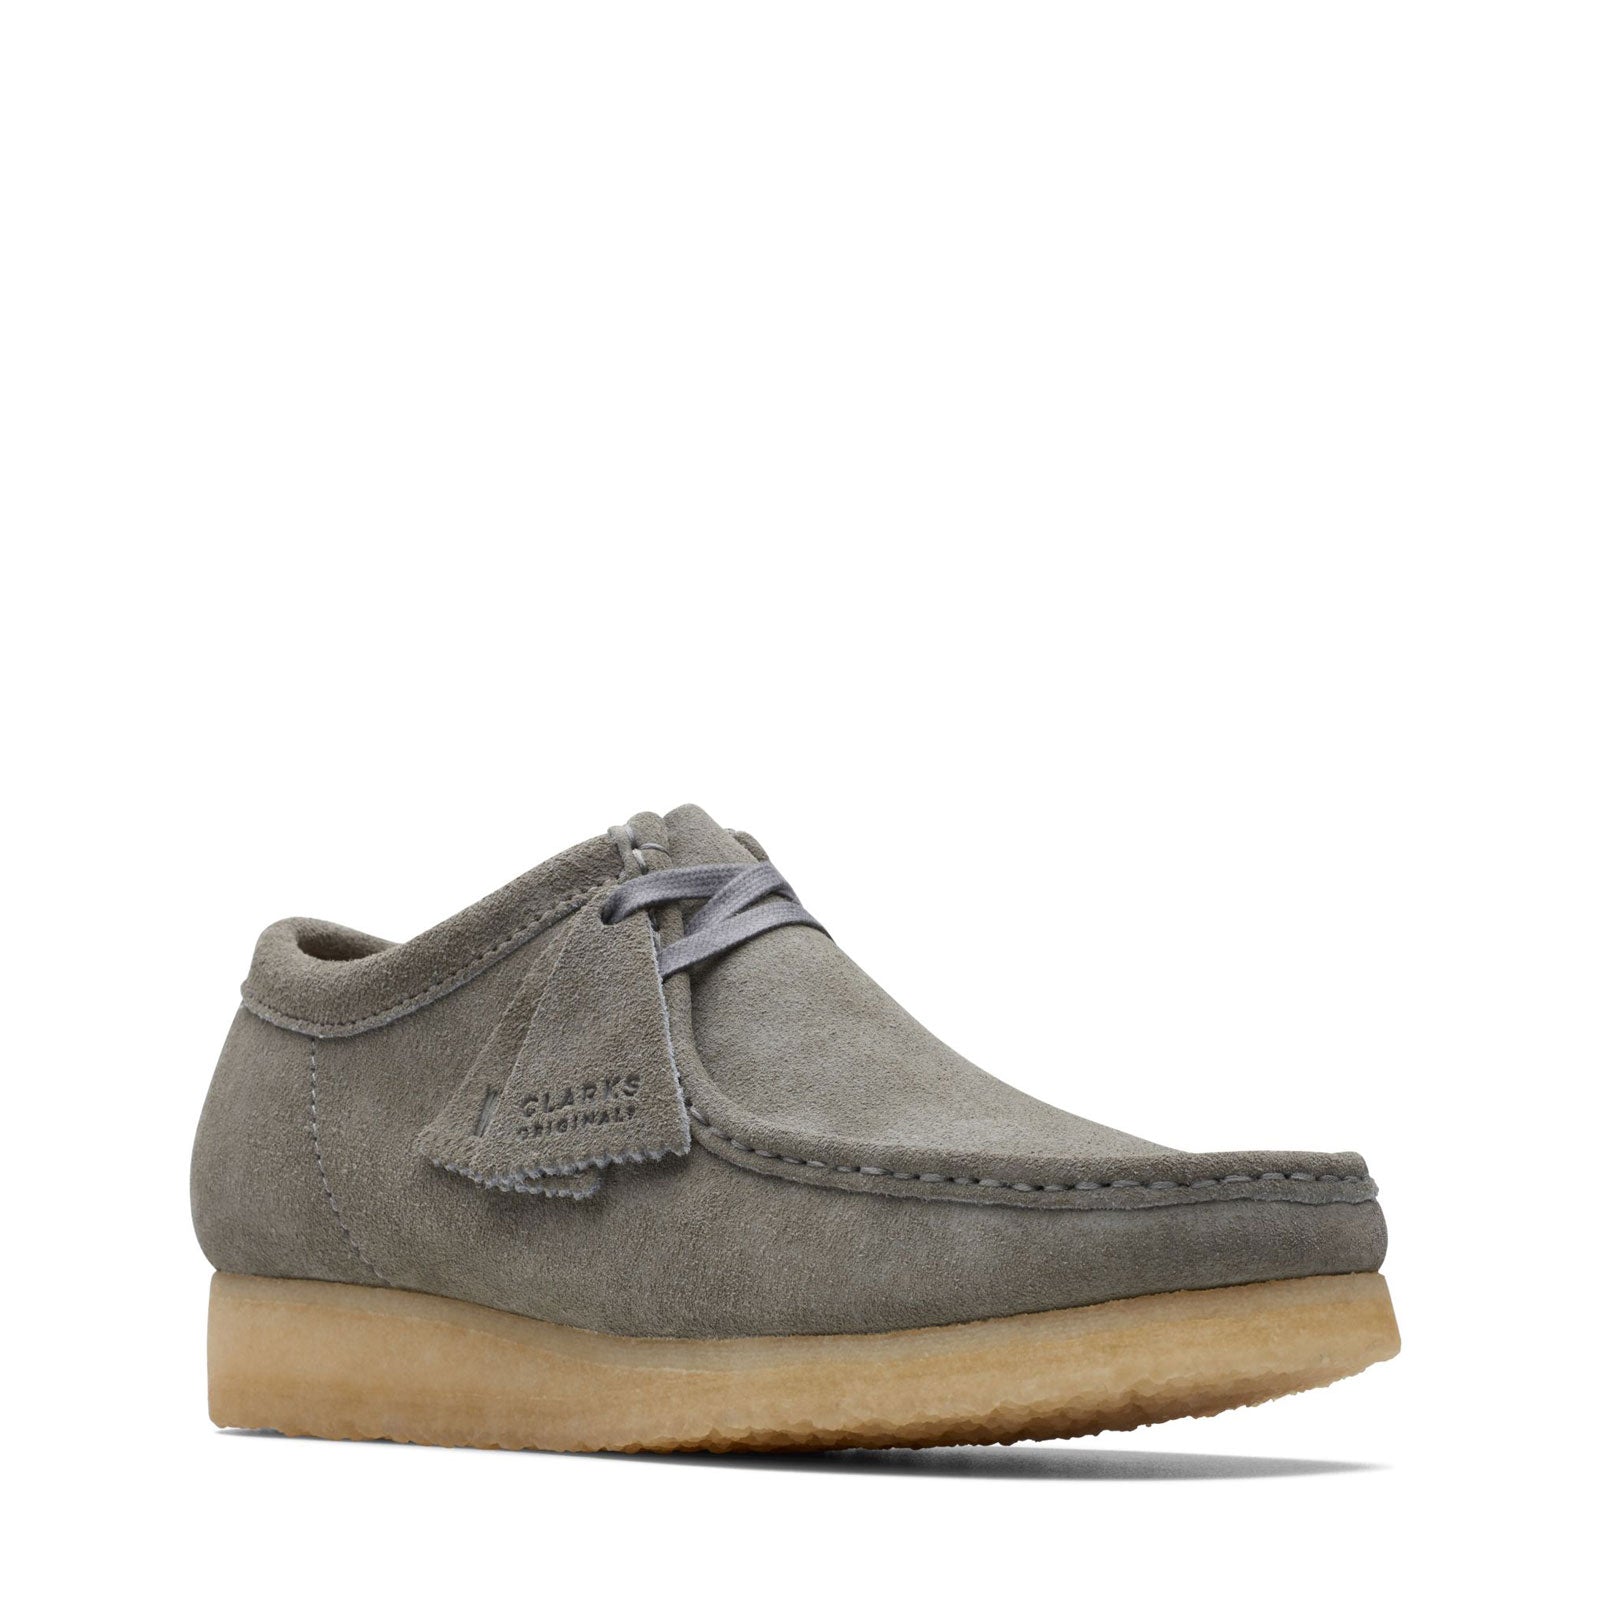 At hoppe jazz Reskyd Clarks Wallabee 70535 (Gray Suede) – Milano Shoes